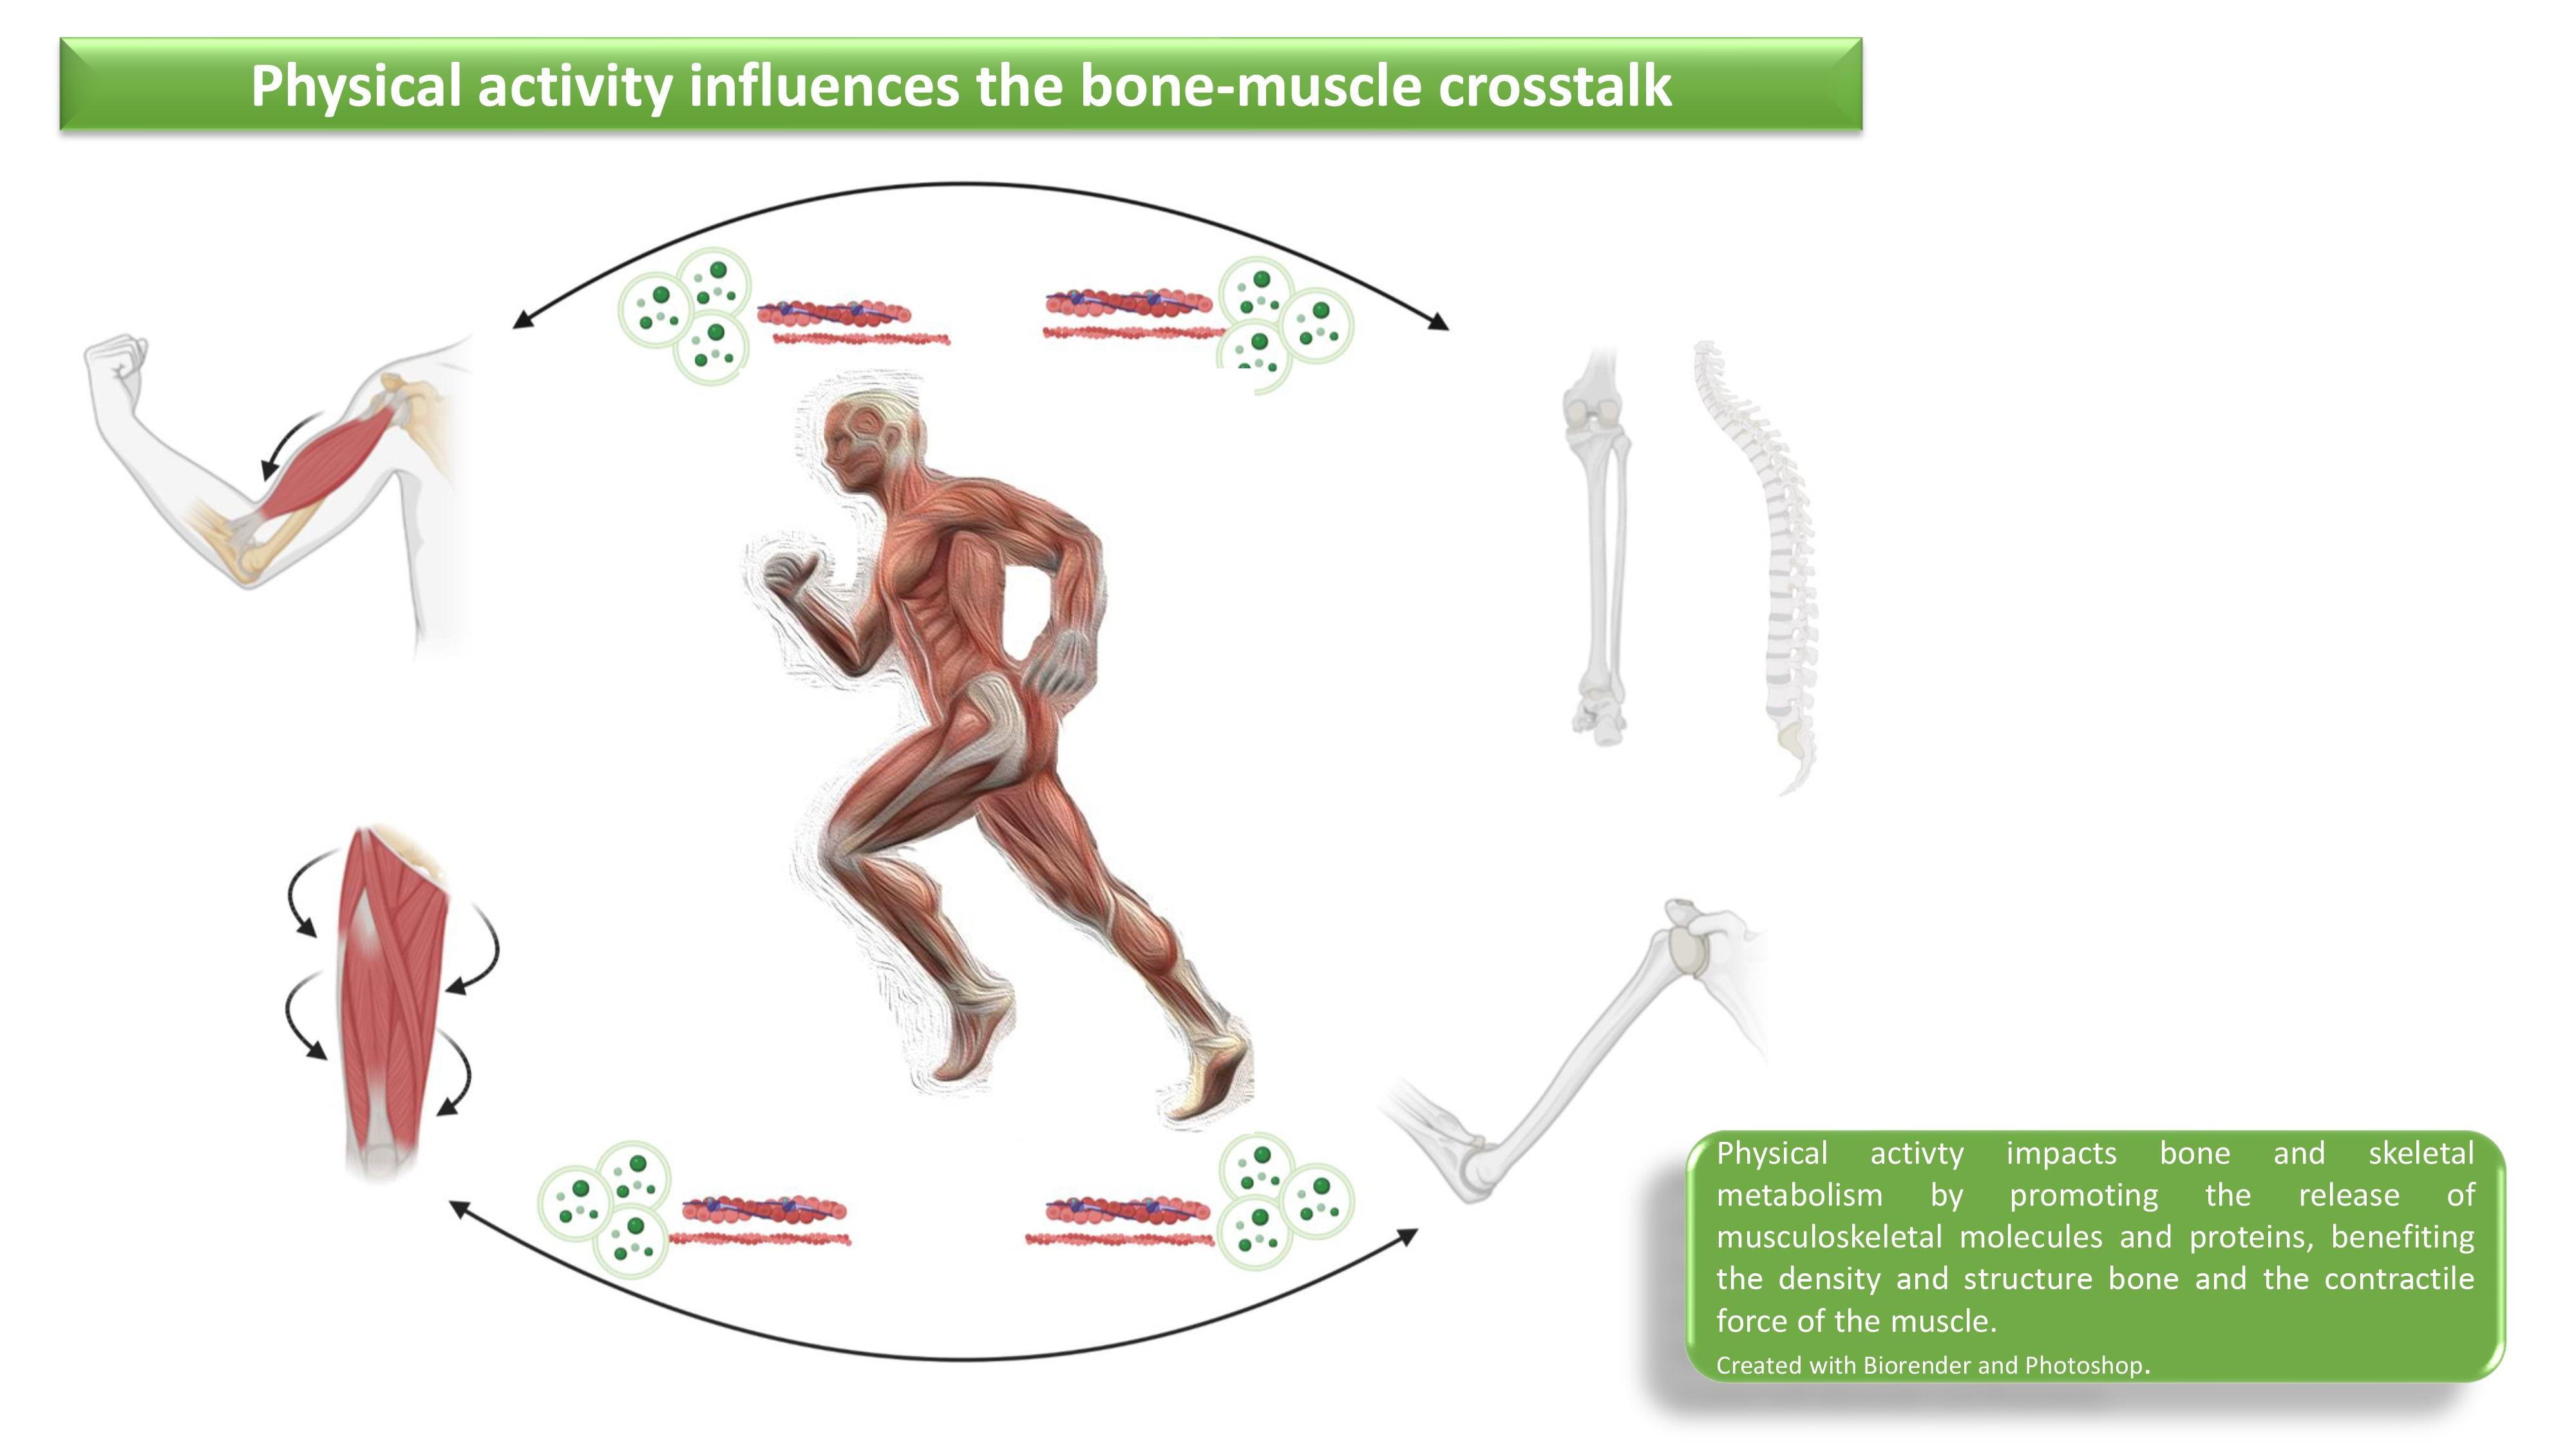 Cells Free Full-Text Crosstalk between Bone and Muscles during Physical Activity photo